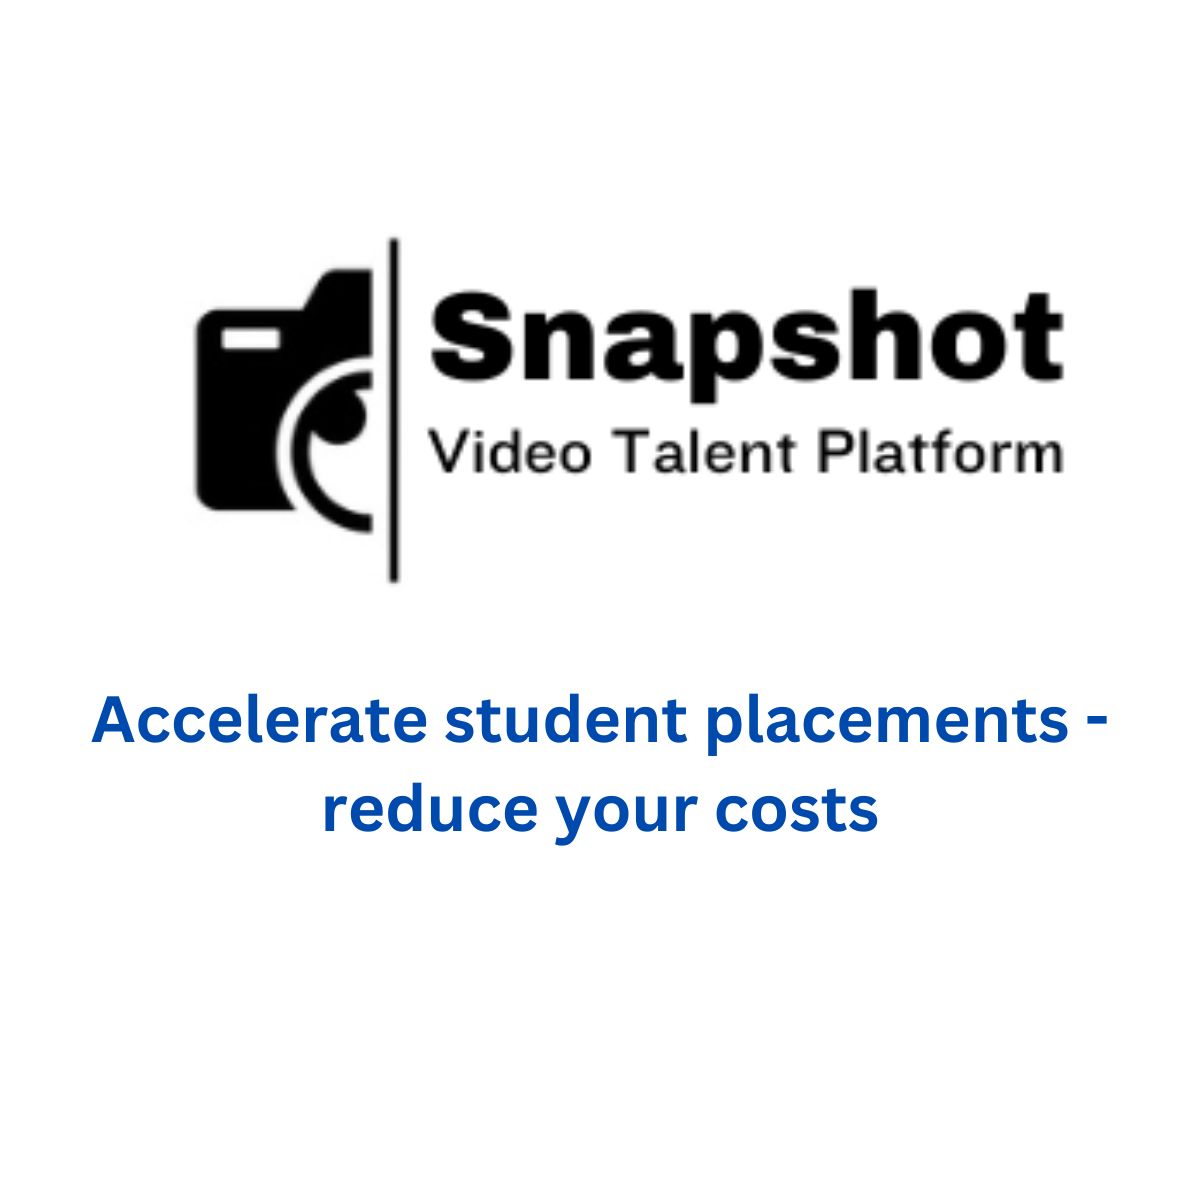 Accelerate student placements - reduce your costs